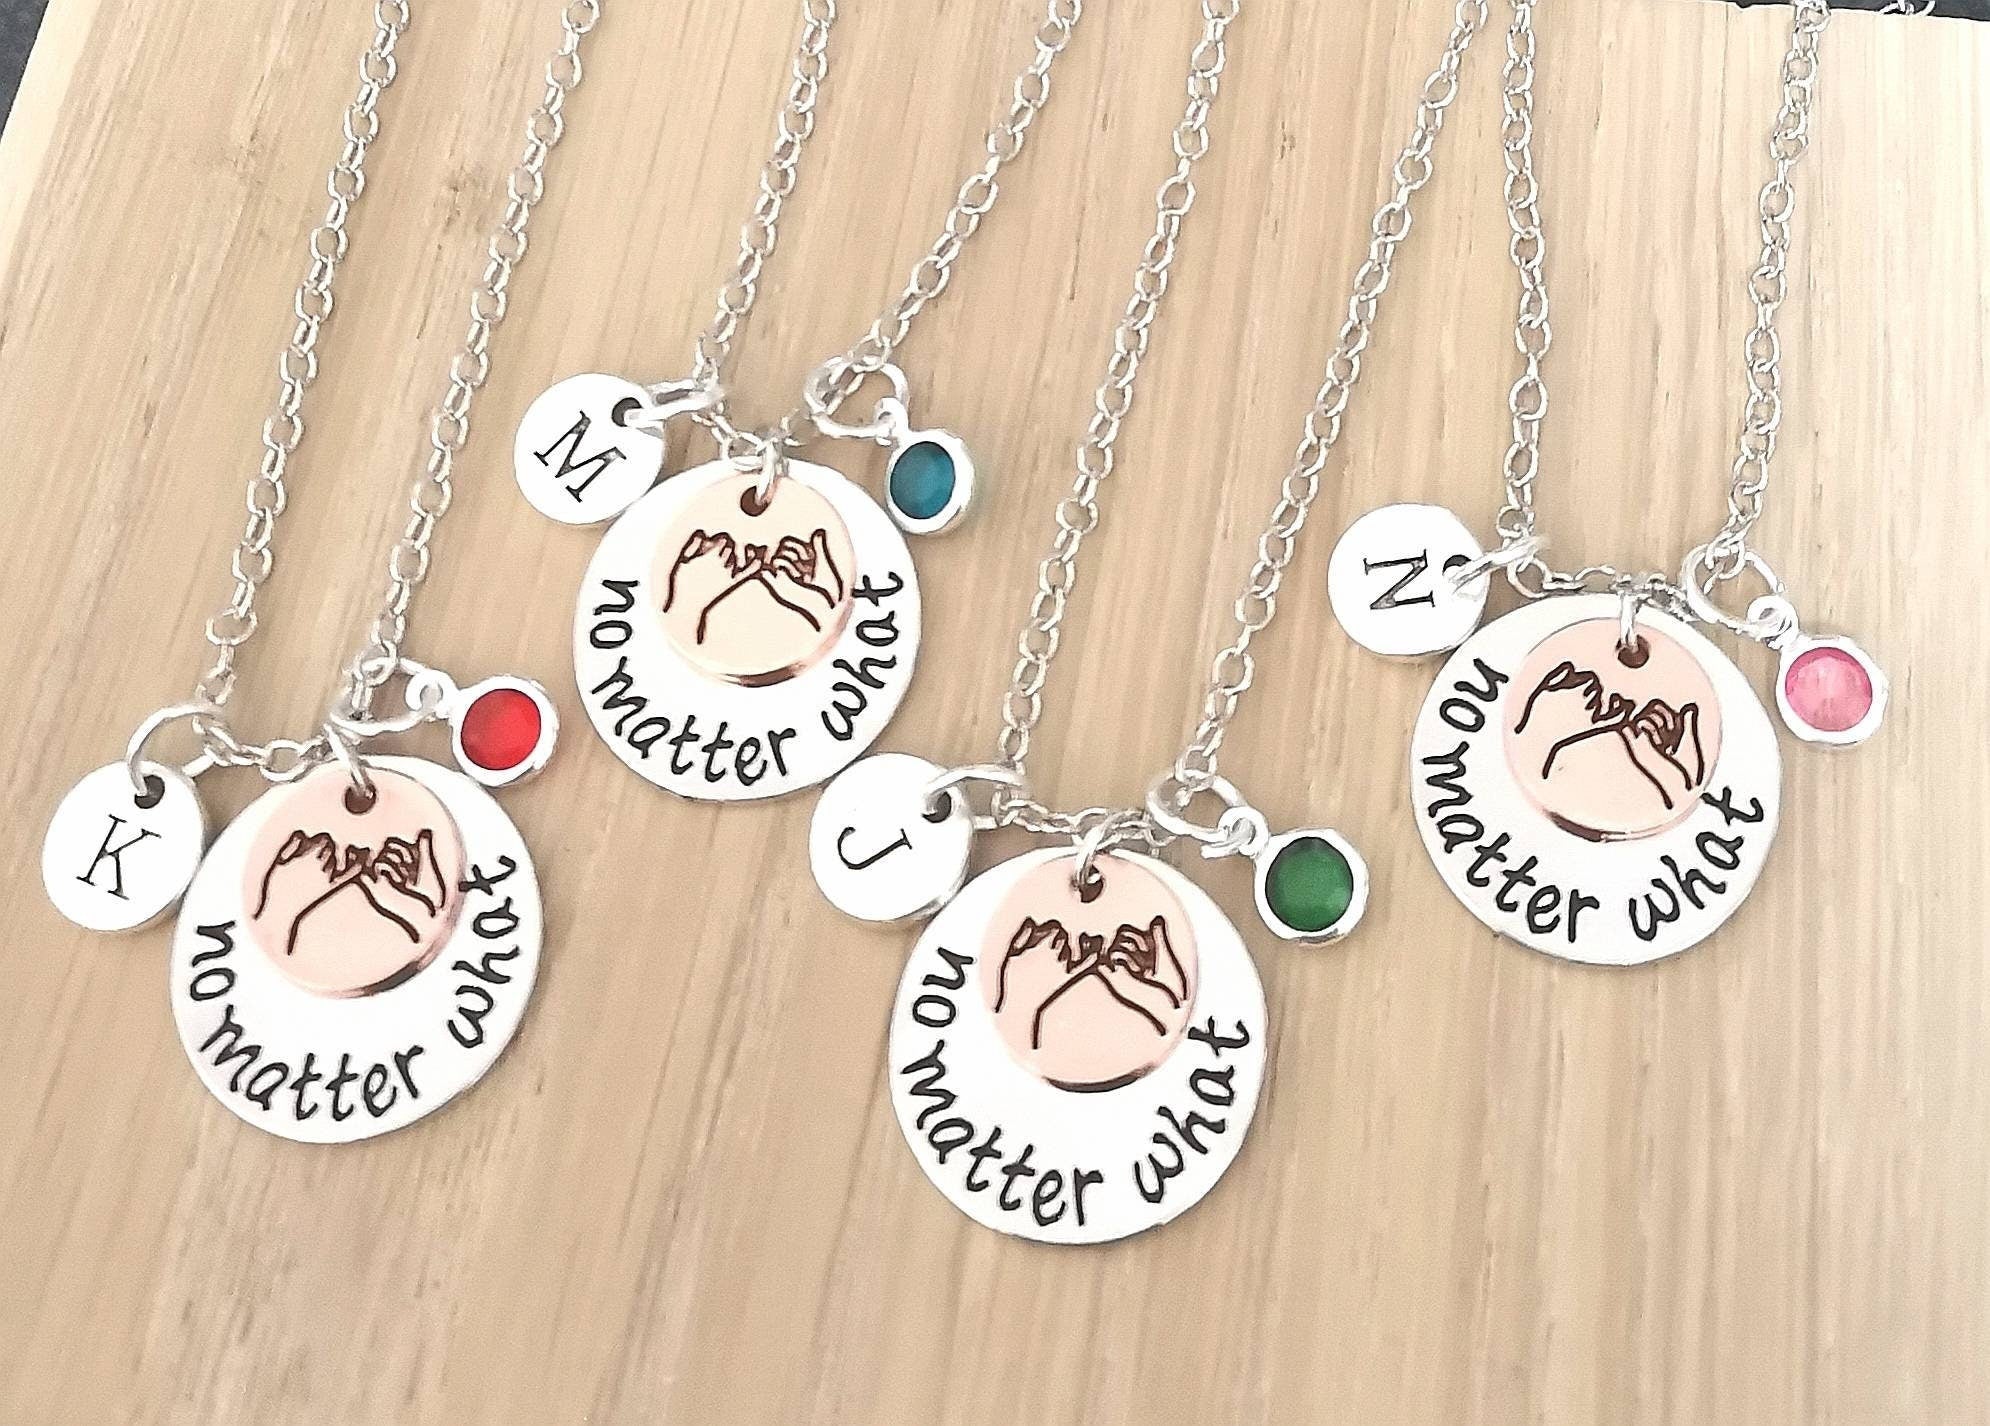 5 Best friend Necklaces, Set of 2 3 4 5 6 7 8, Bff necklace Set, Matching, Friendship, friends, Best friend Necklaces, BFF,  No matter what